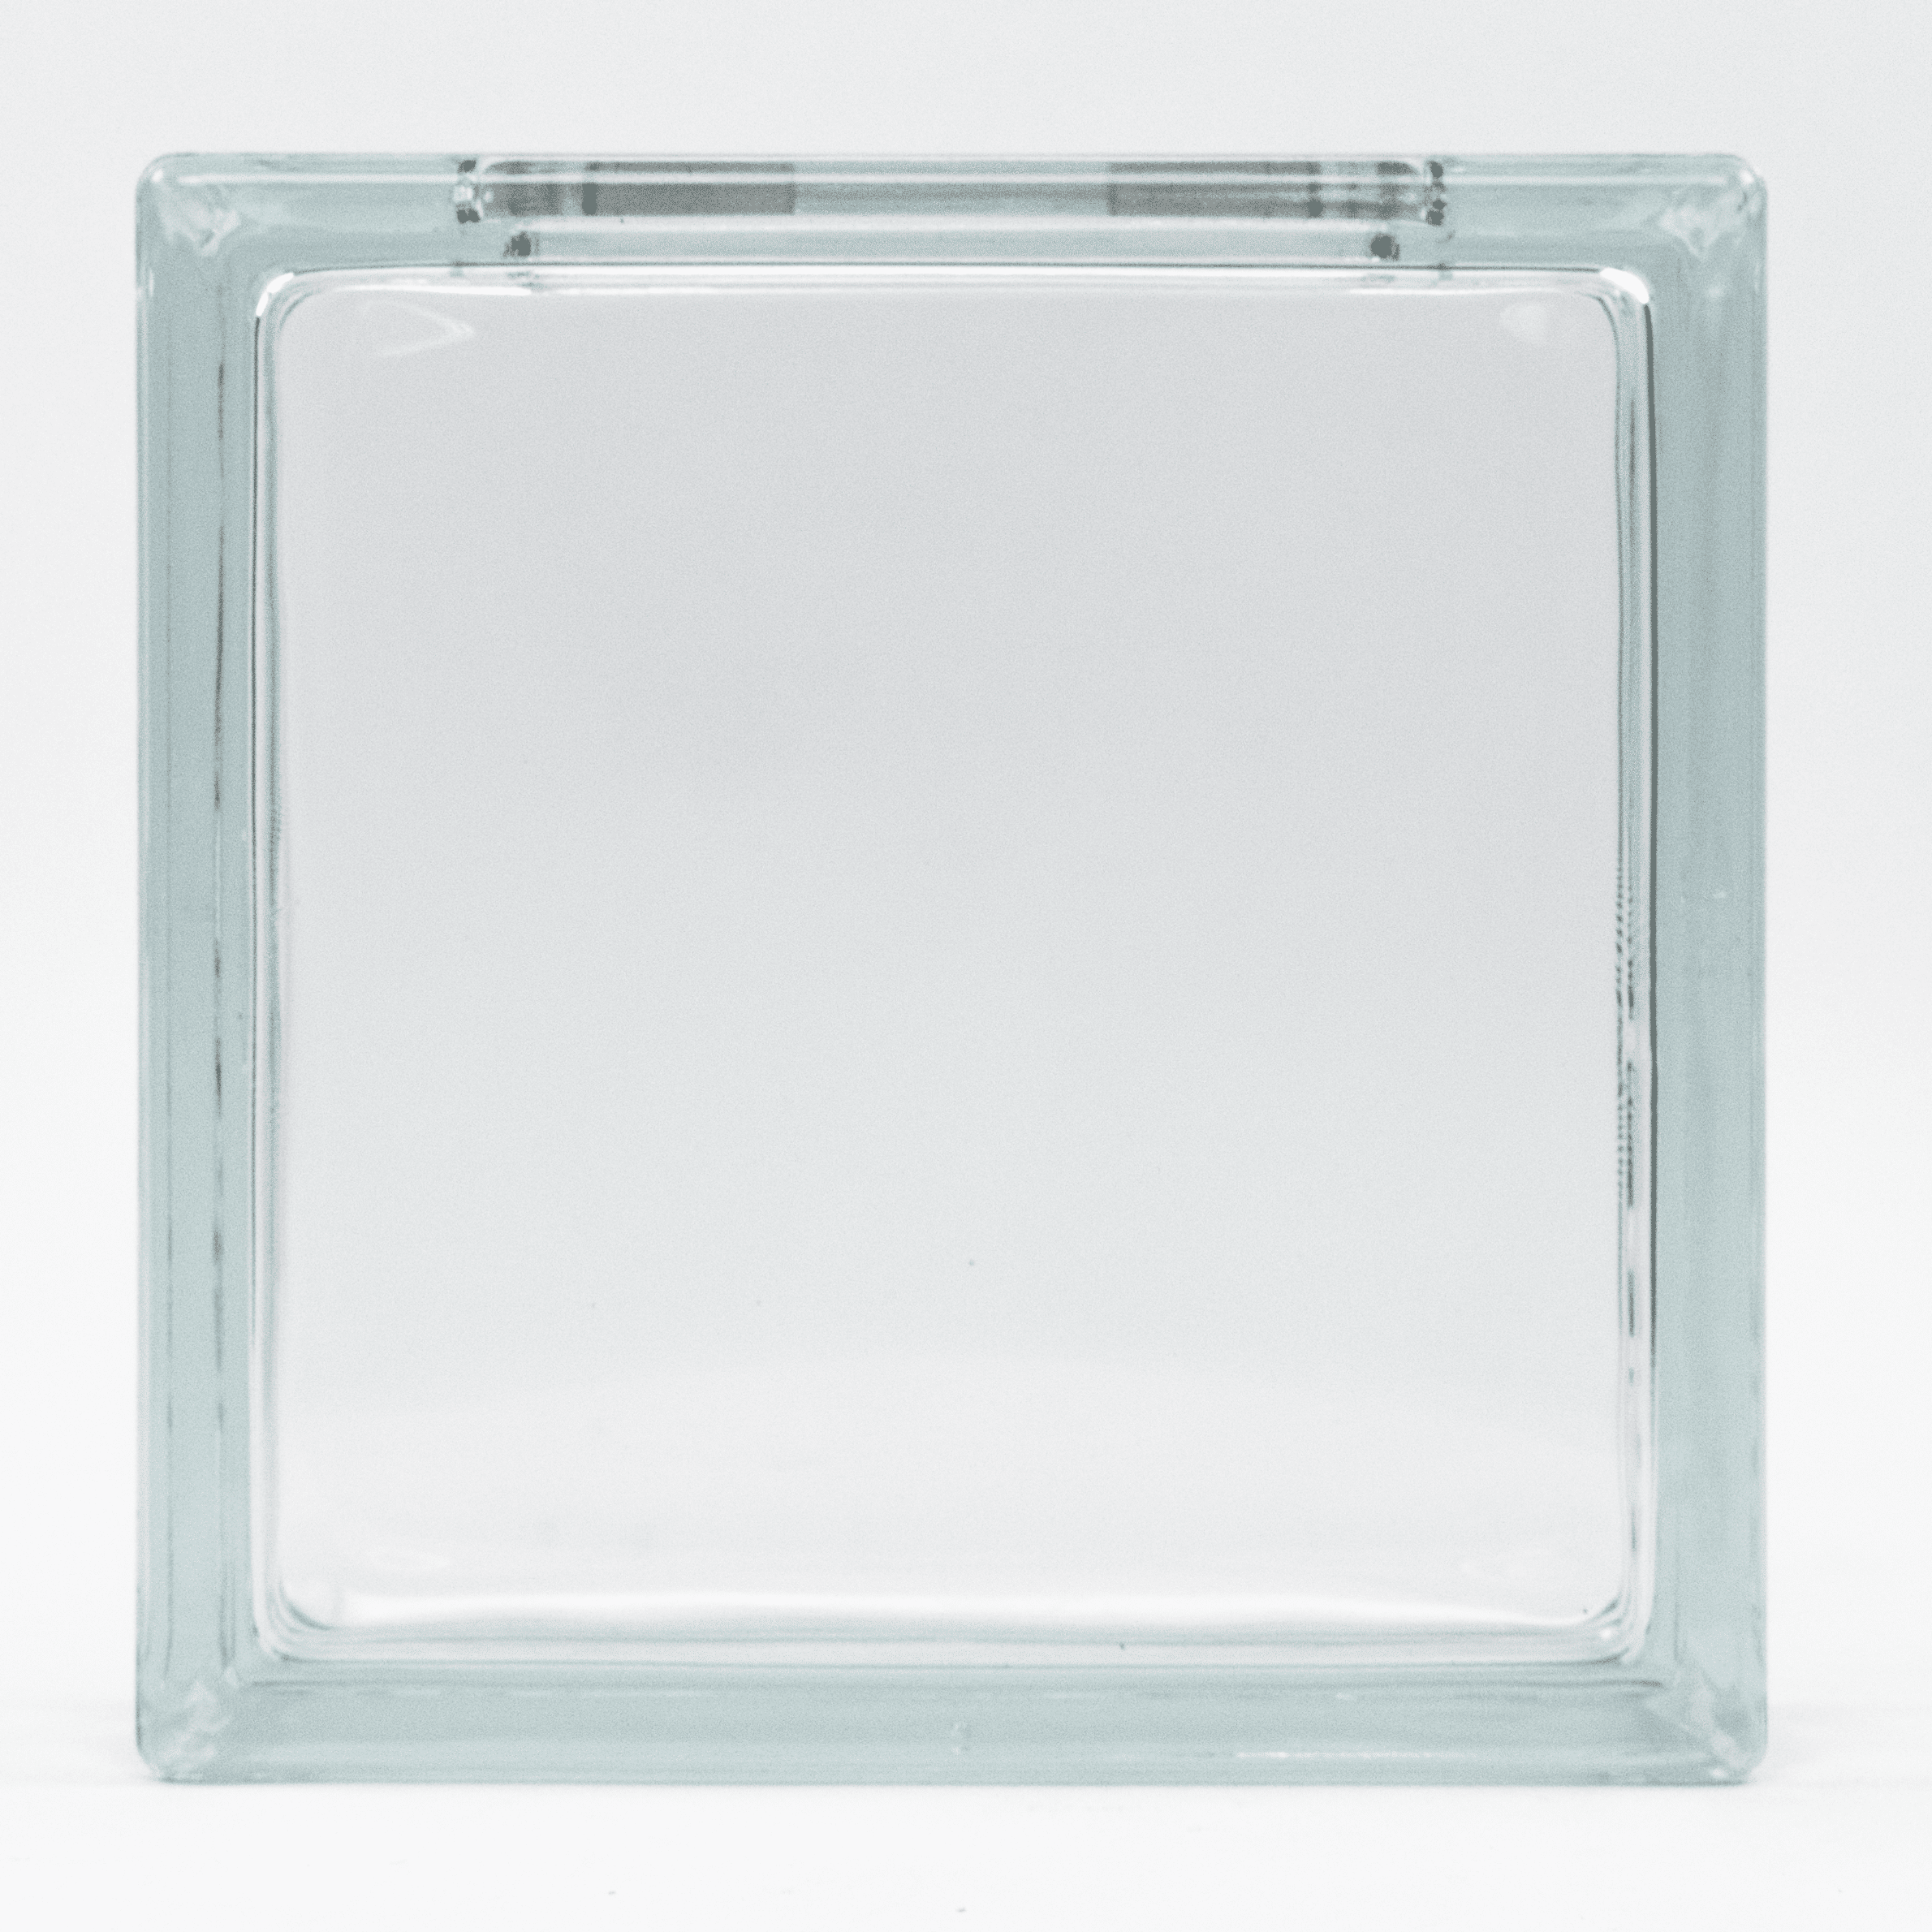 Mulia 8W x 8H x 3D Clear Craft and Décor Hollow Glass Block at